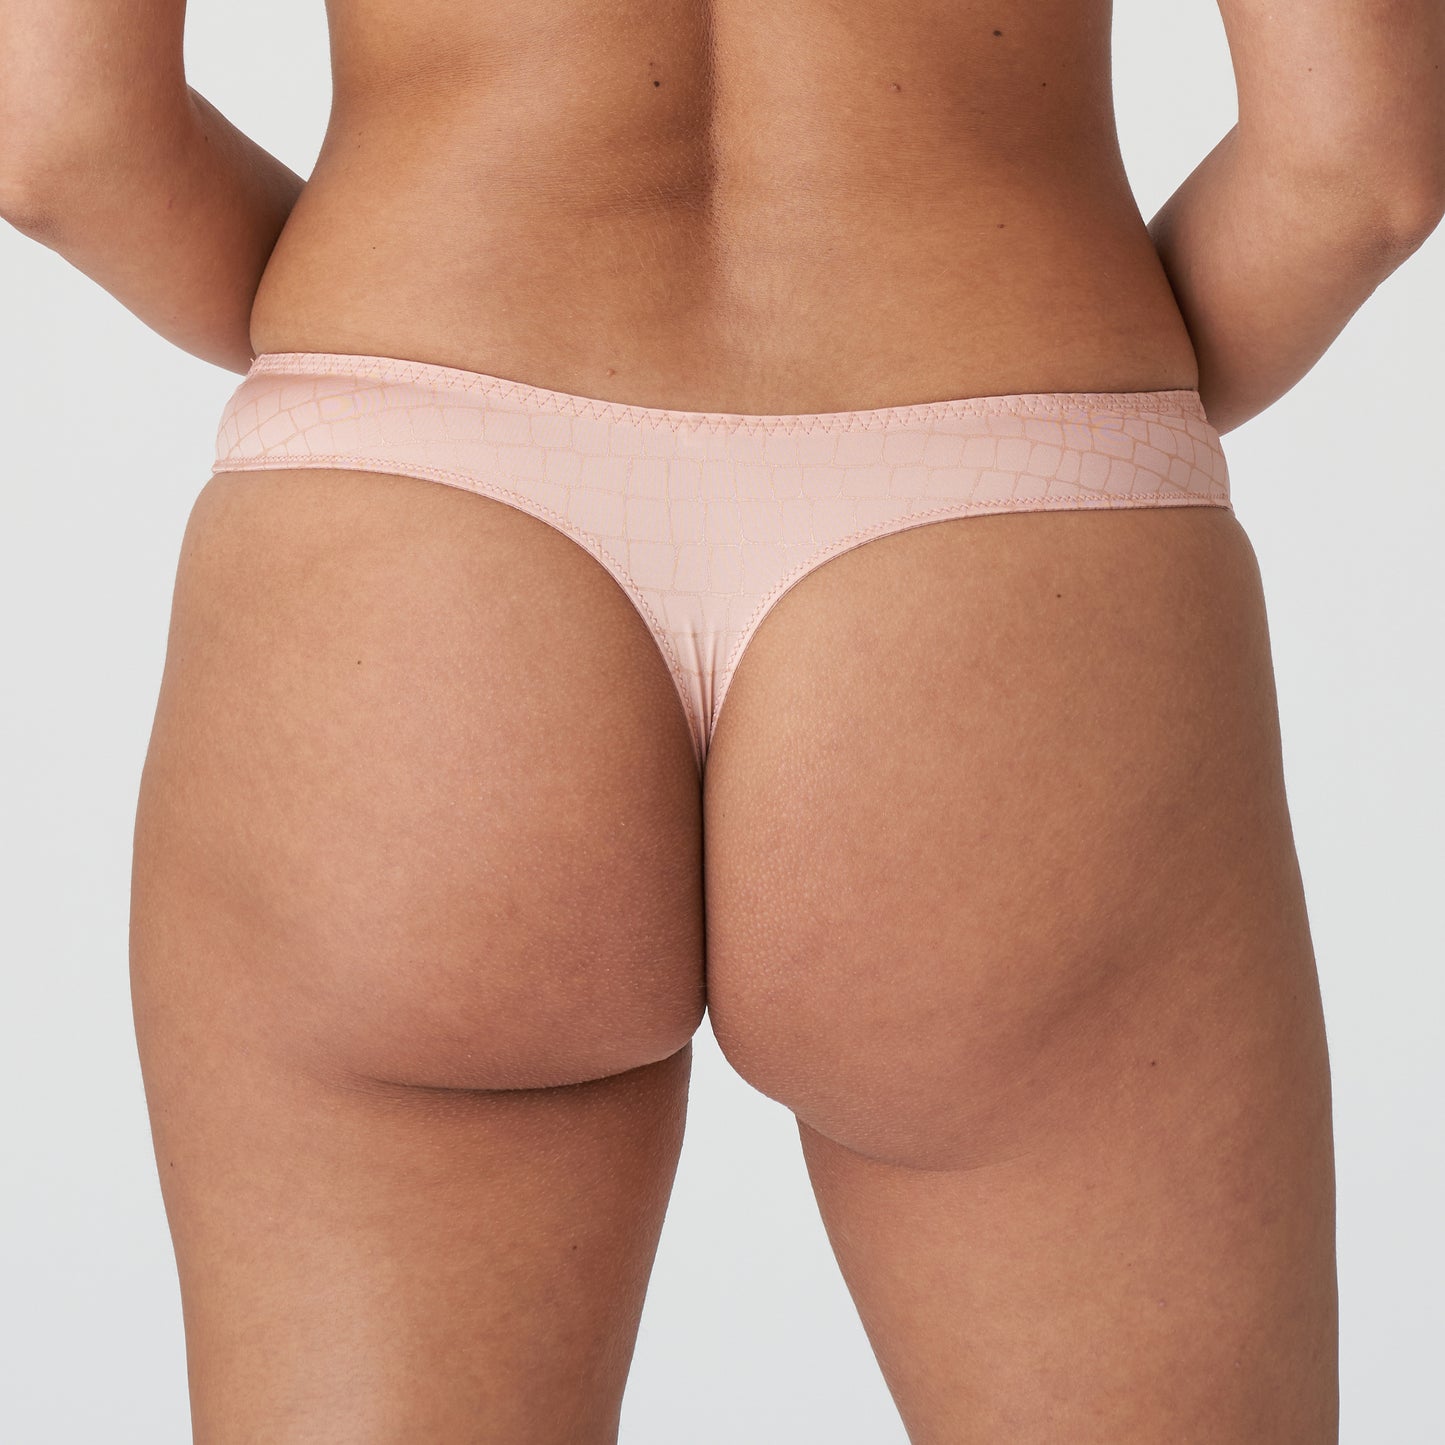 Torrance Thong In Dusty Pink - Prima Donna Twist